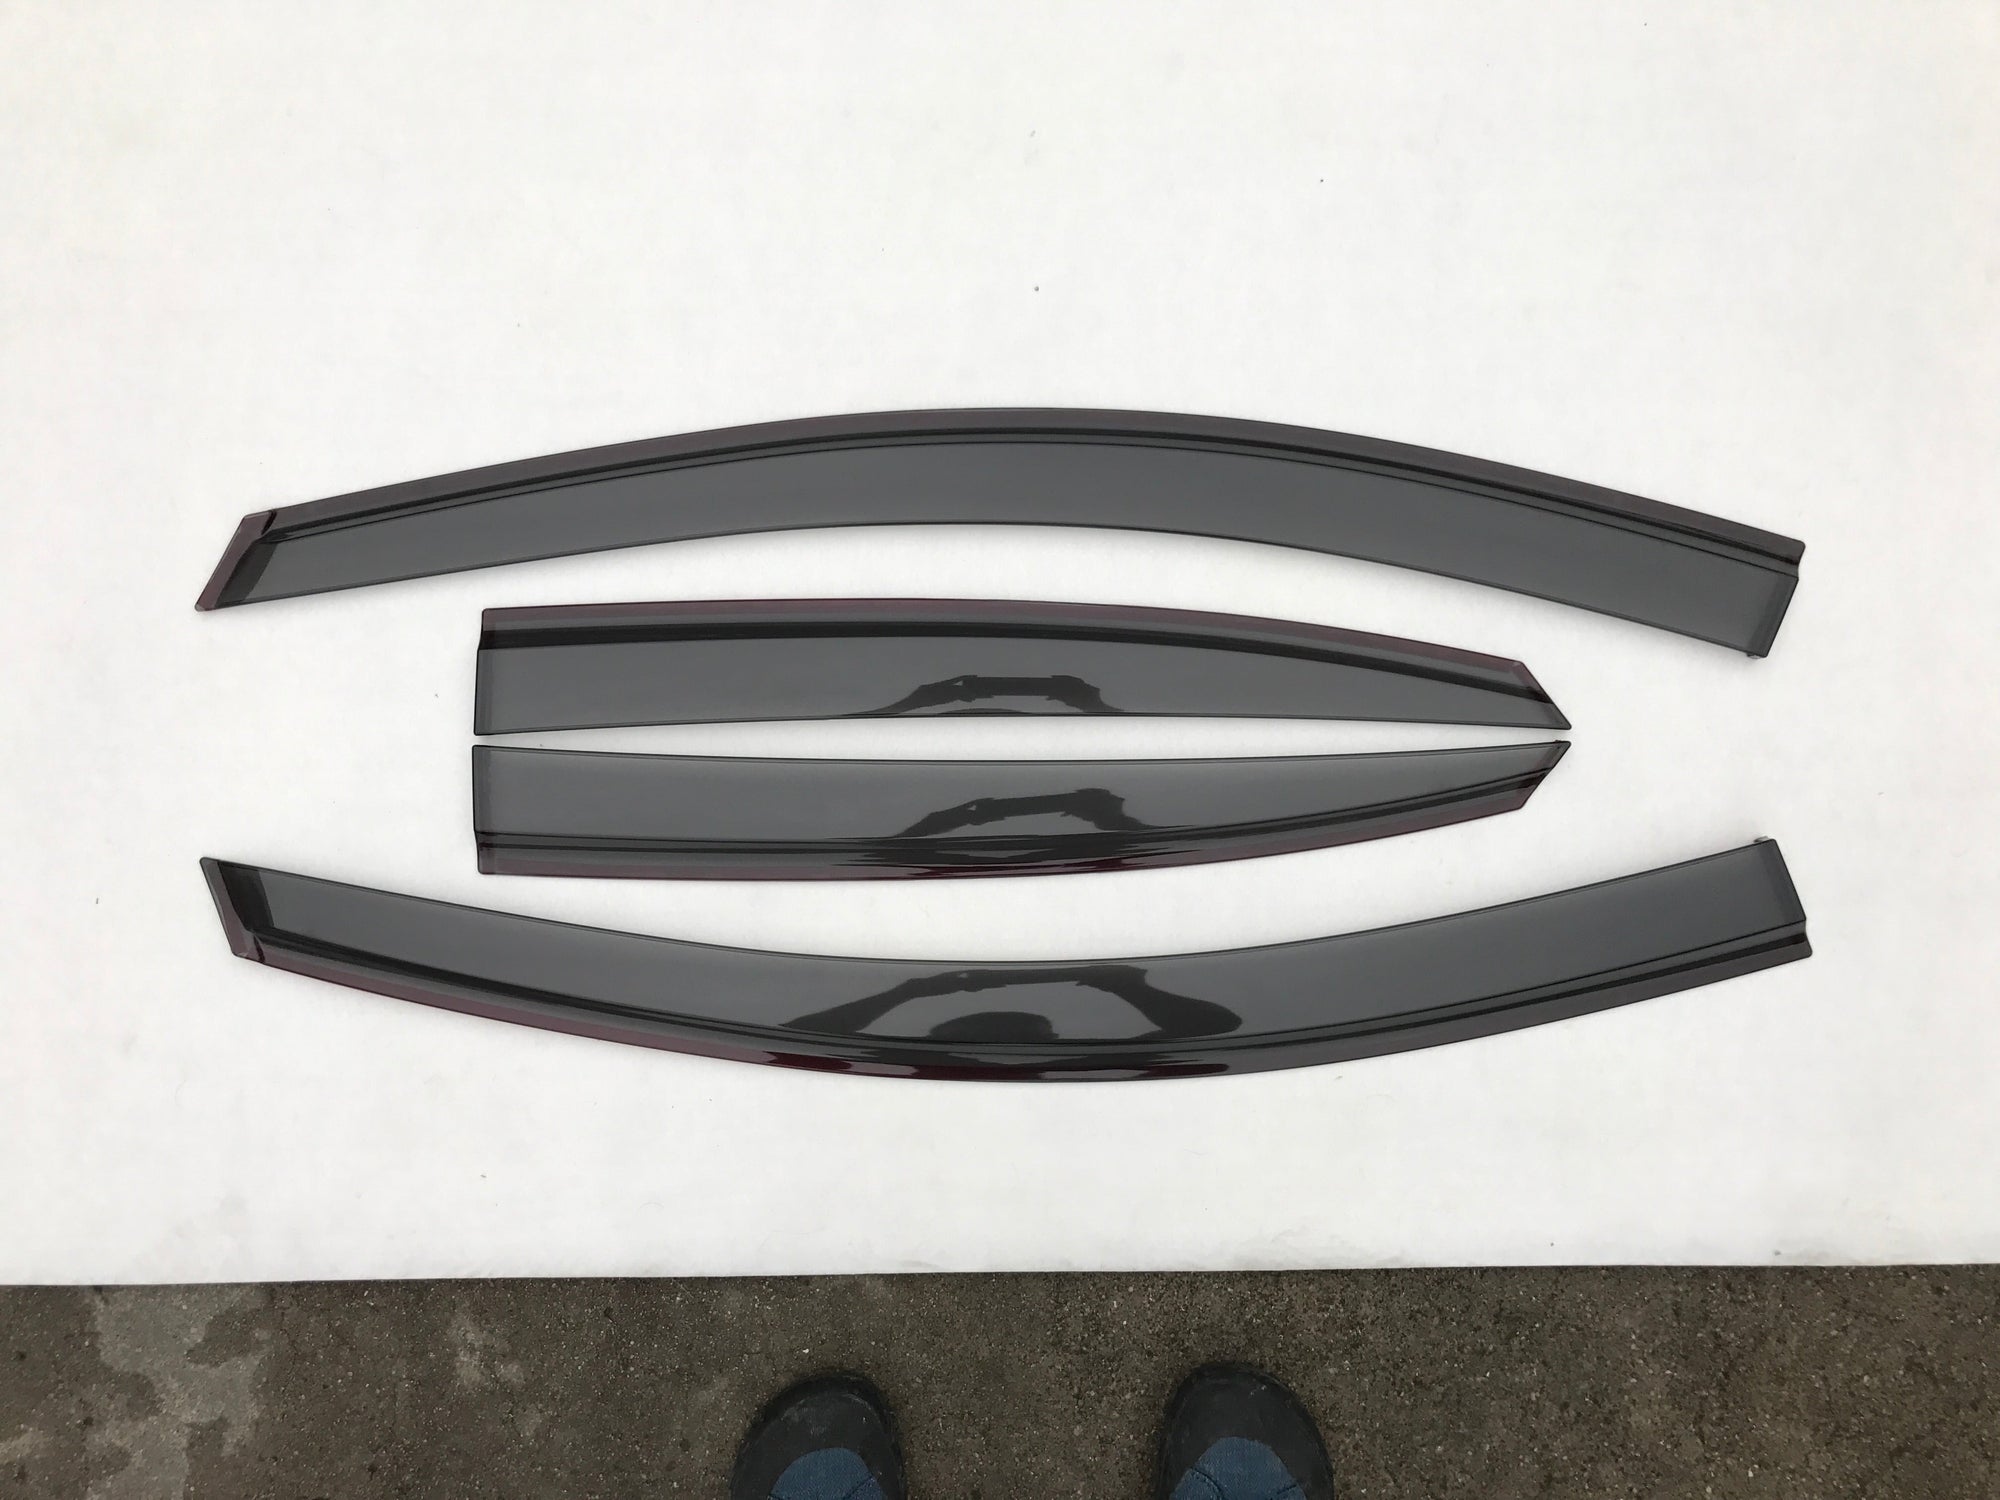 FORD FOCUS (Hatch Back) 2004 - 2011 Window Visors | Weather Shields